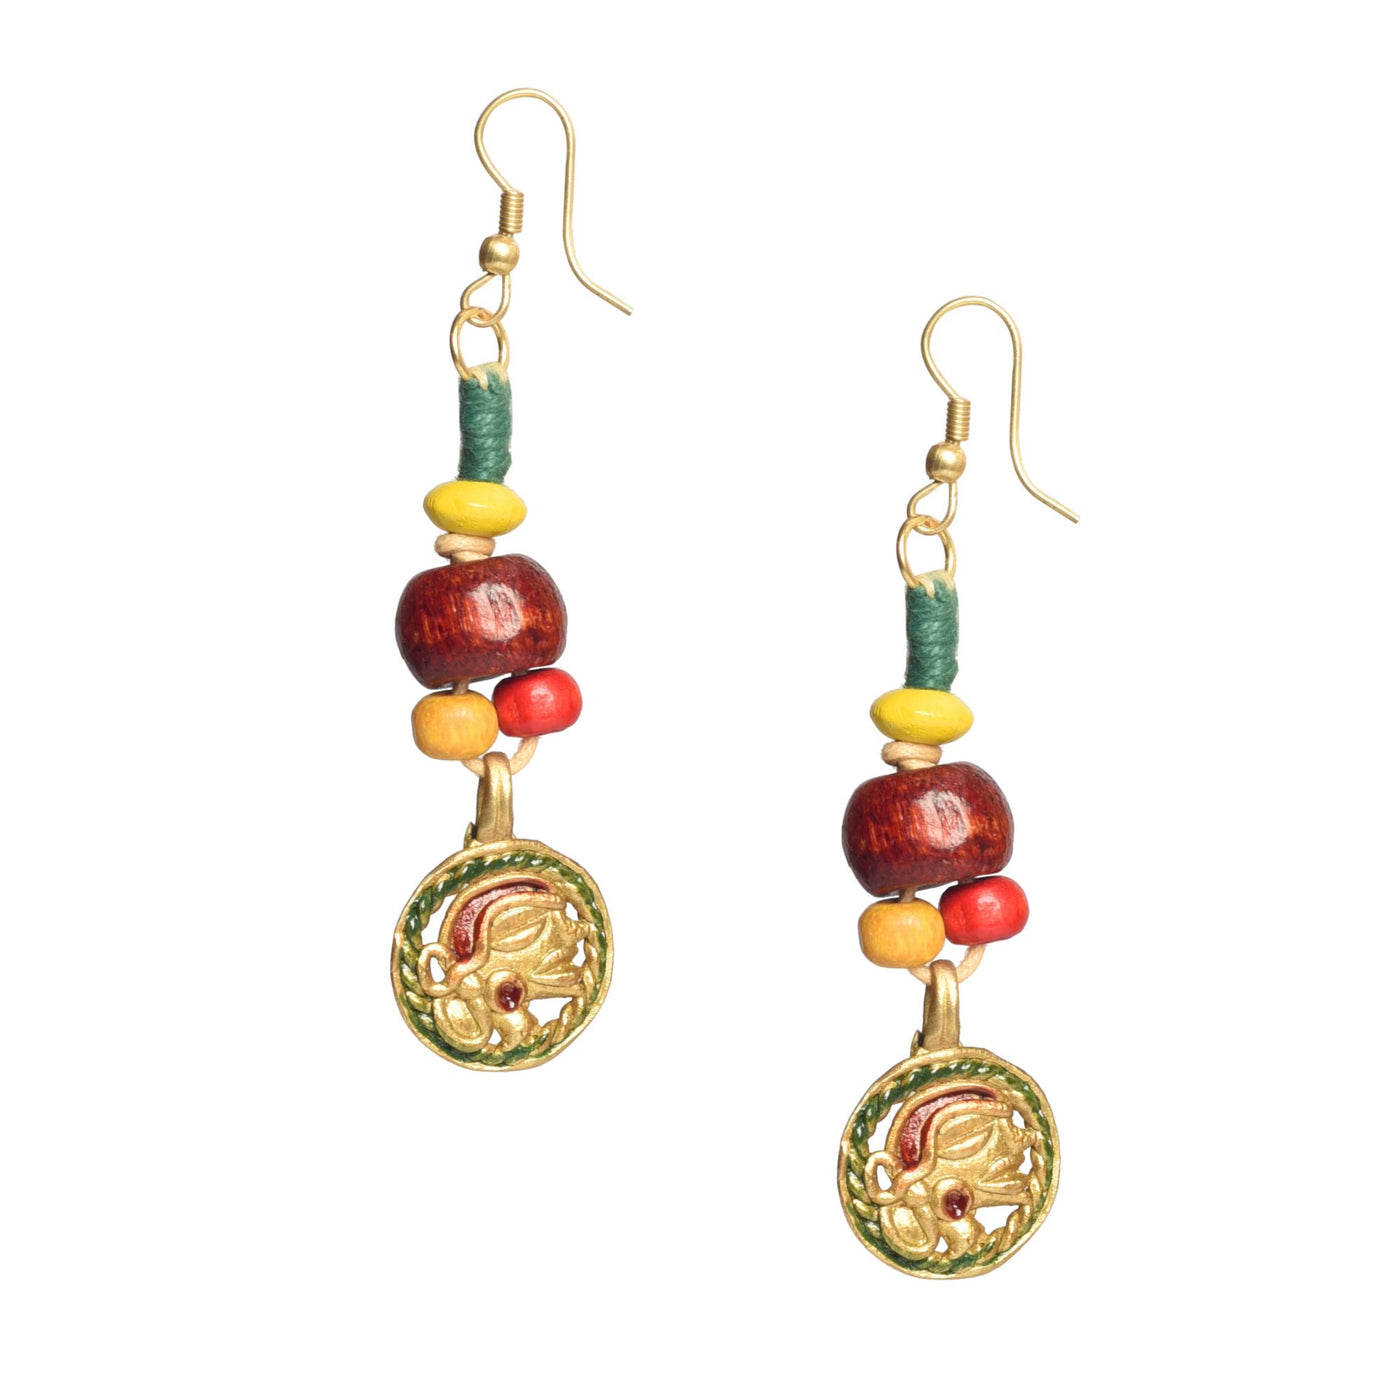 The Procession Handcrafted Tribal Earrings - Fashion & Lifestyle - 3